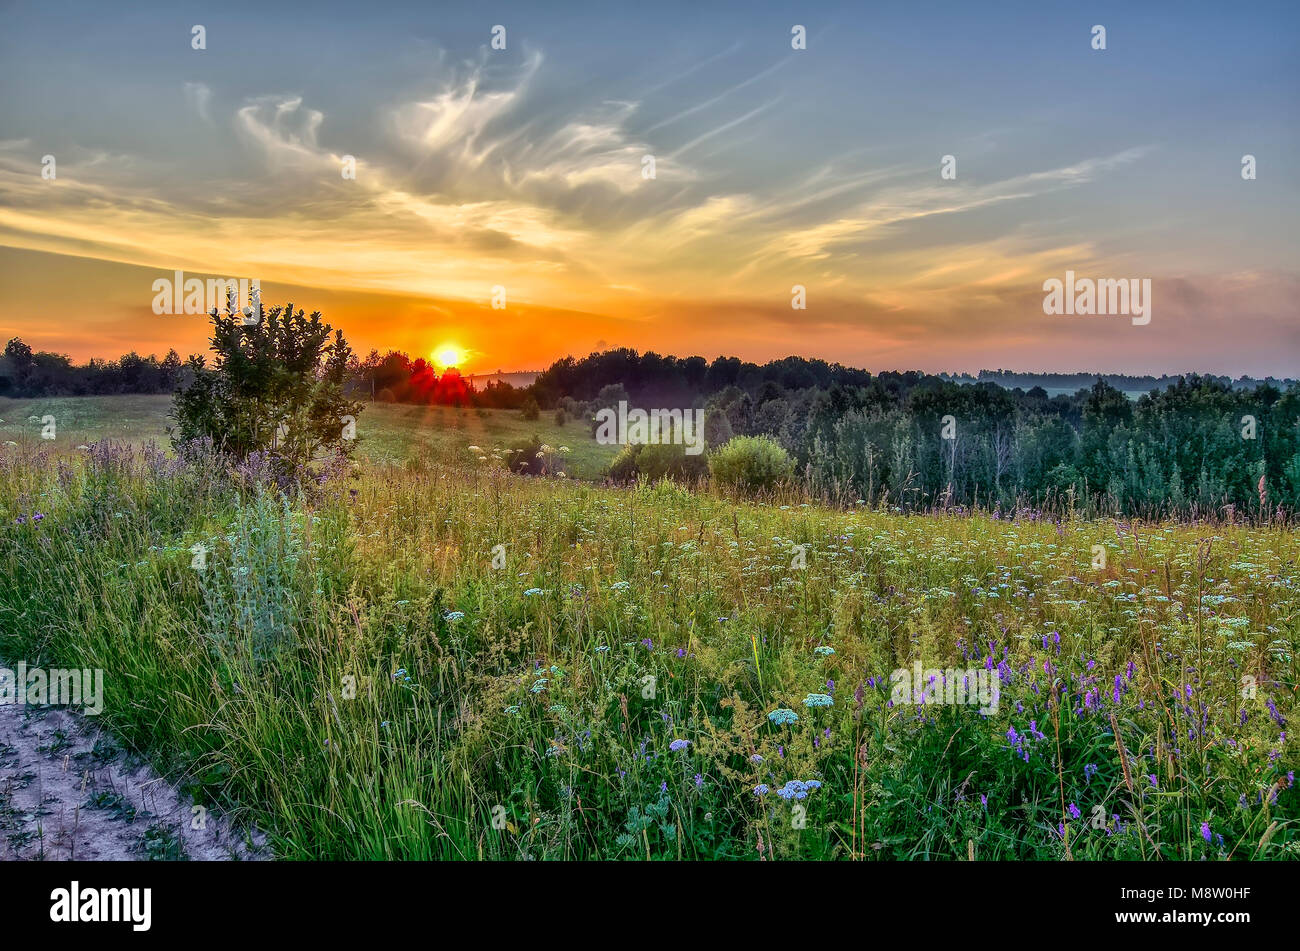 Picturesque golden sunbeams of summer sunset over colorful and fragrance flowering meadow with different  wildflowers and medicinal herbs Stock Photo